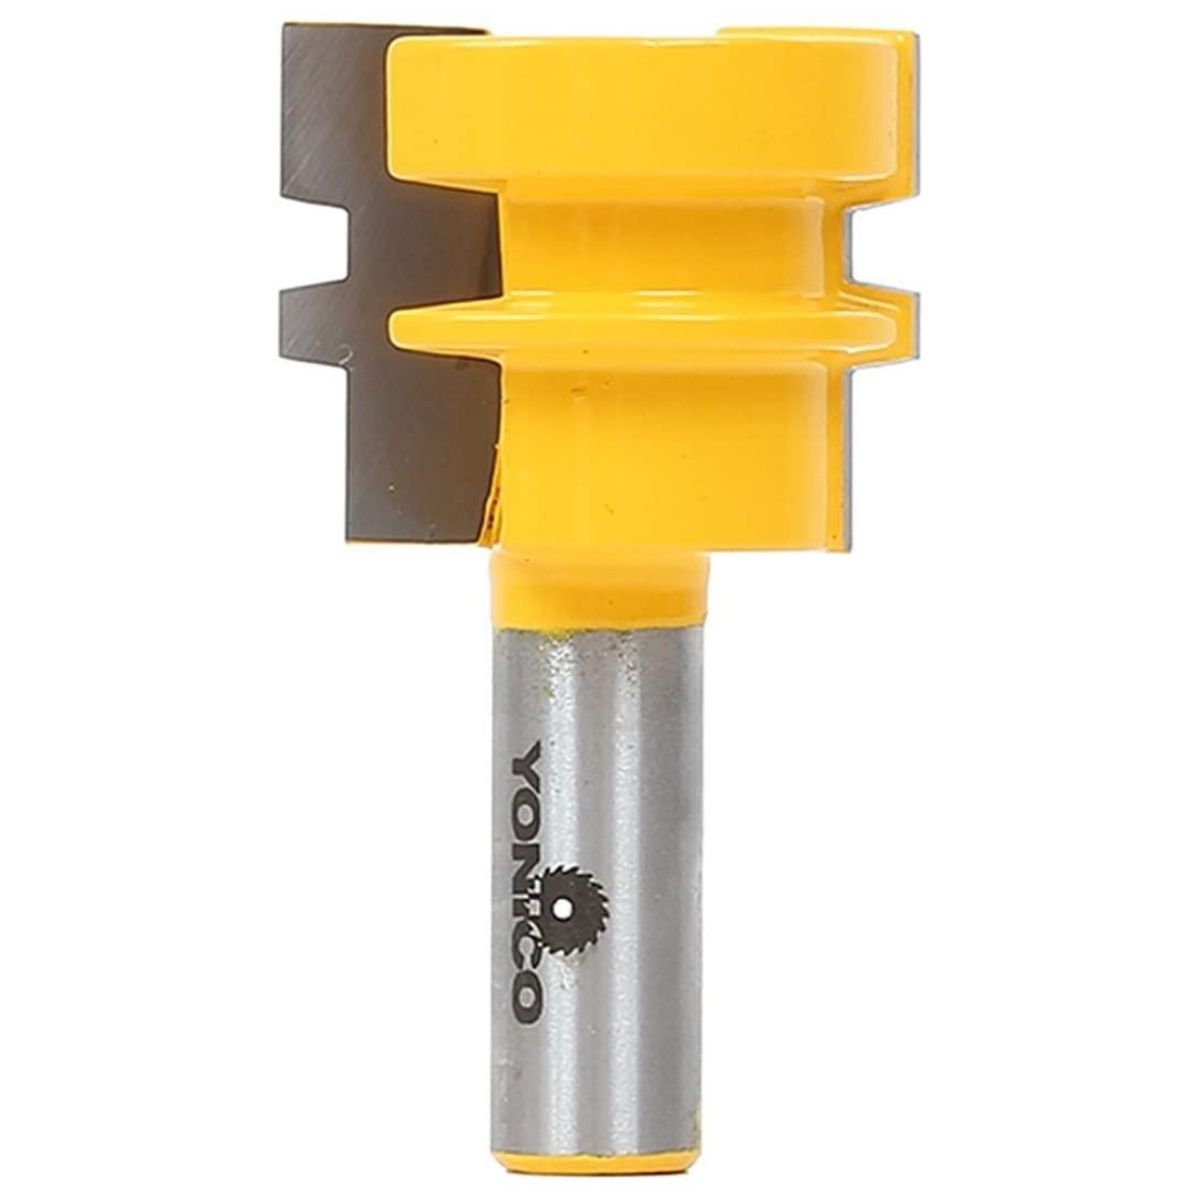 The Router Bit Types Option: Glue Joint